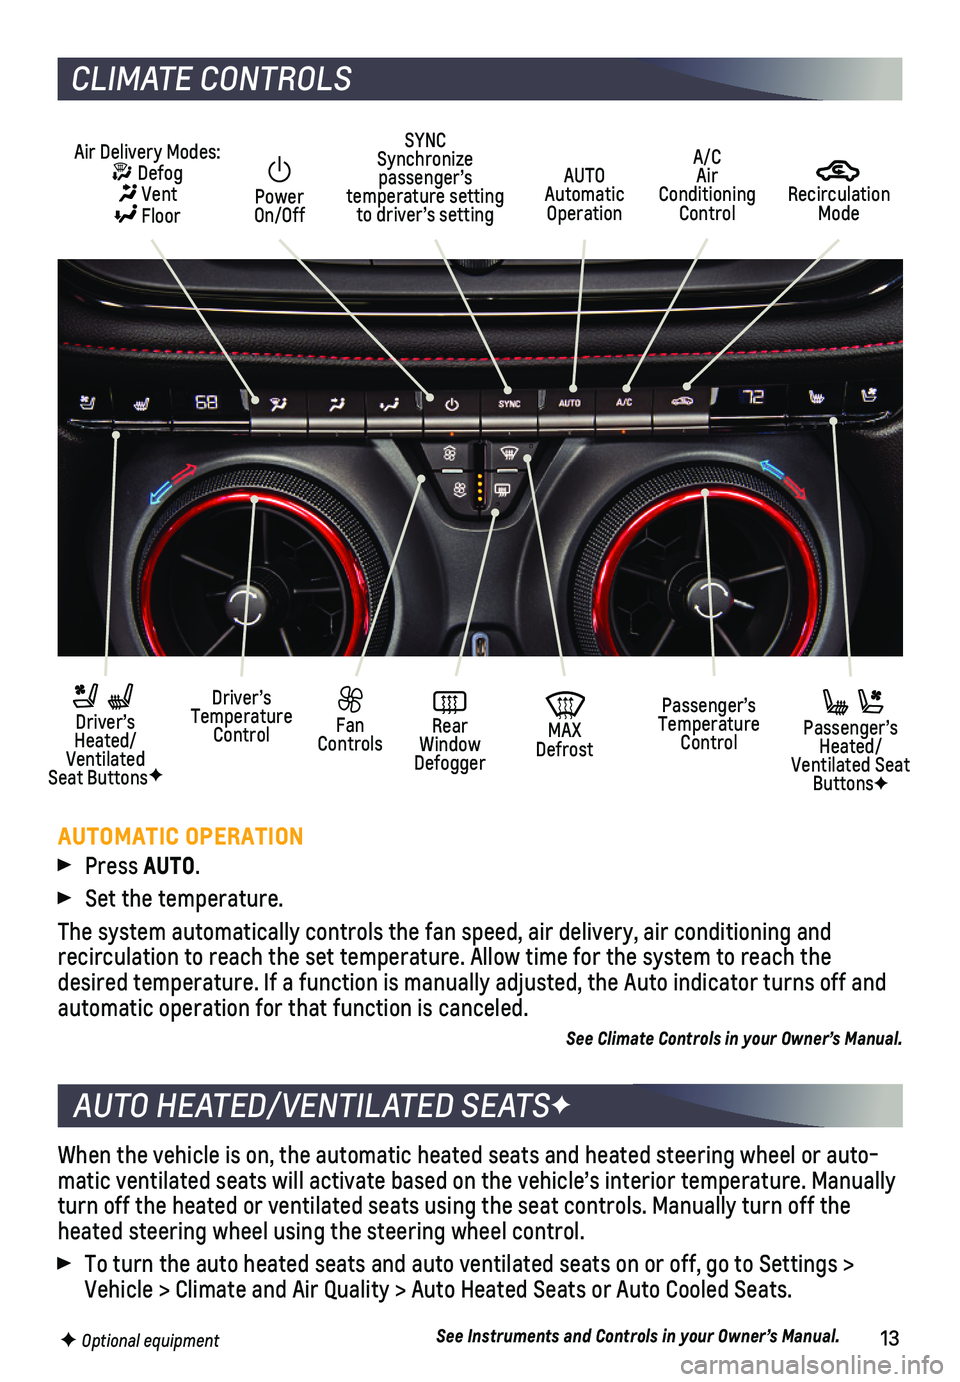 CHEVROLET BLAZER 2019  Get To Know Guide 13
When the vehicle is on, the automatic heated seats and heated steering w\
heel or auto-matic ventilated seats will activate based on the vehicle’s interior \
temperature. Manually turn off the he